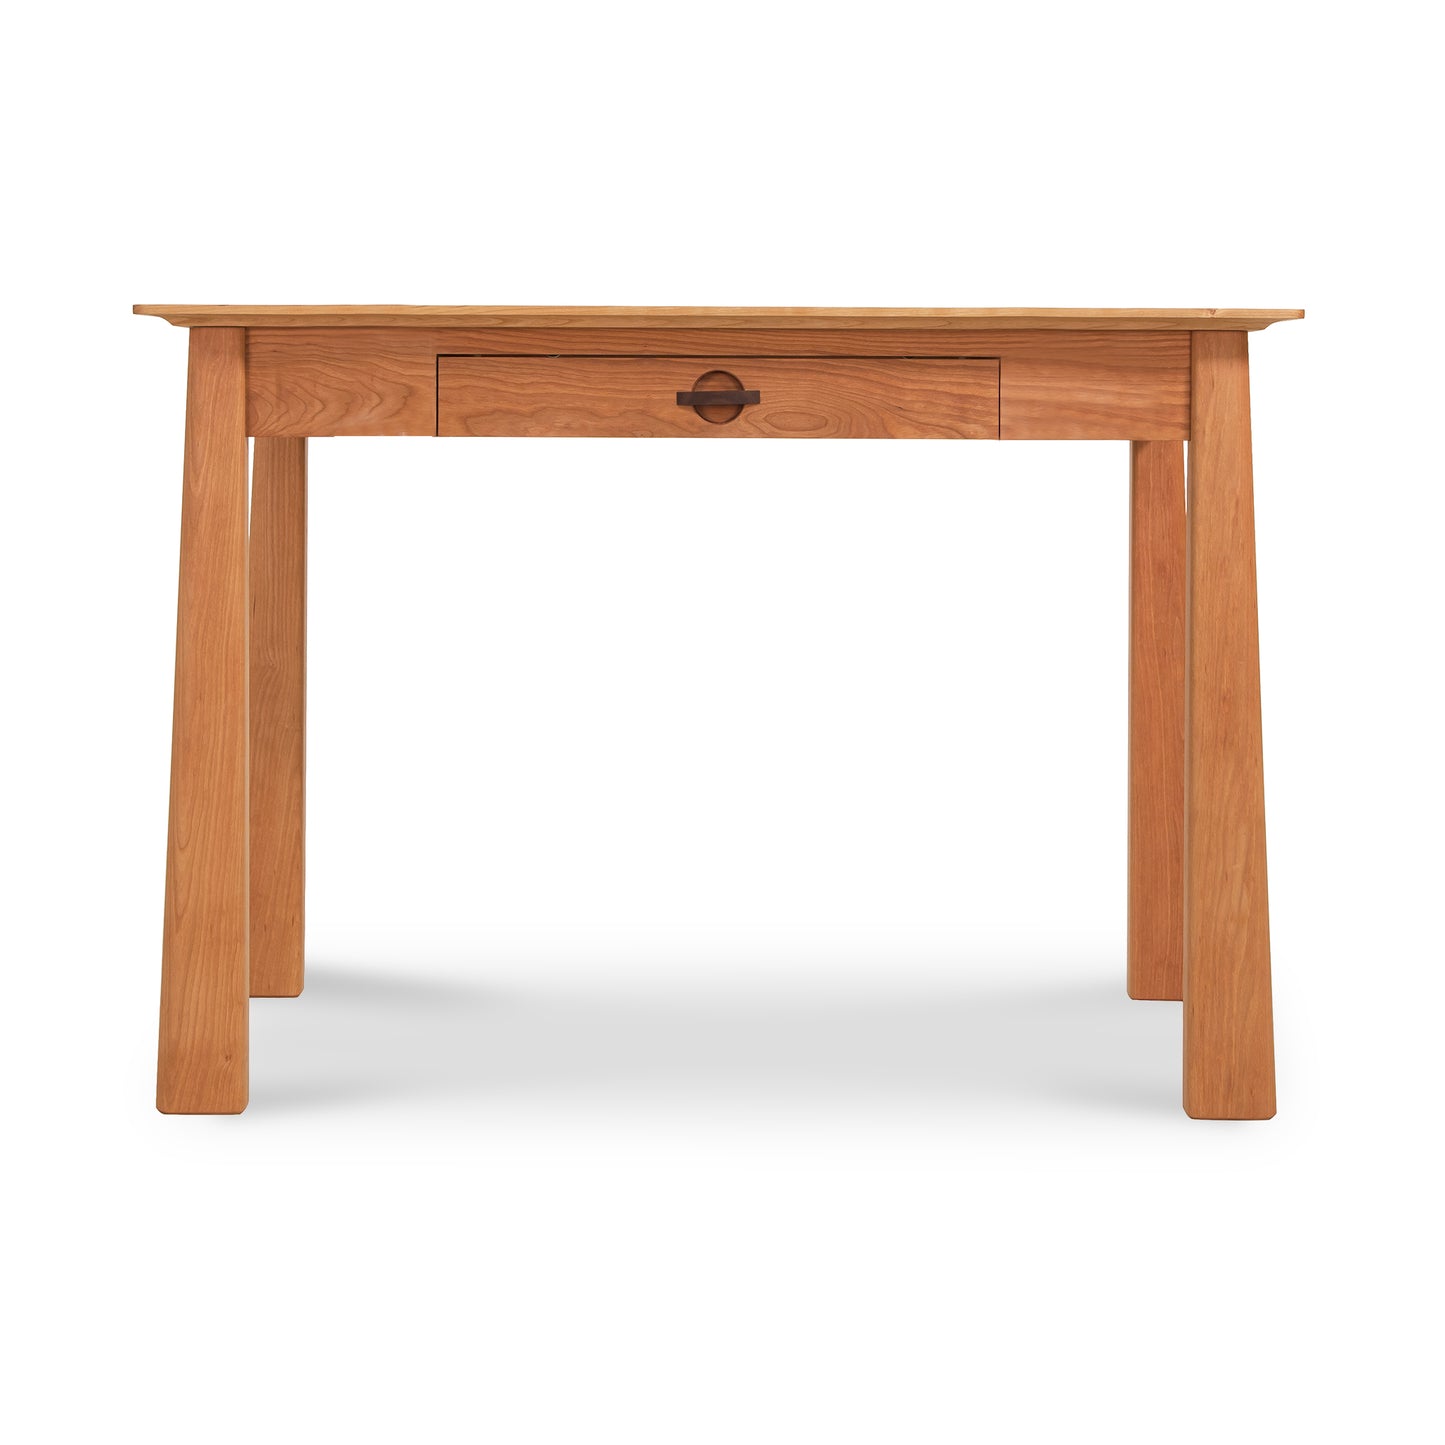 A Maple Corner Woodworks Cherry Moon Writing Desk with a single centered drawer, set against a white background.